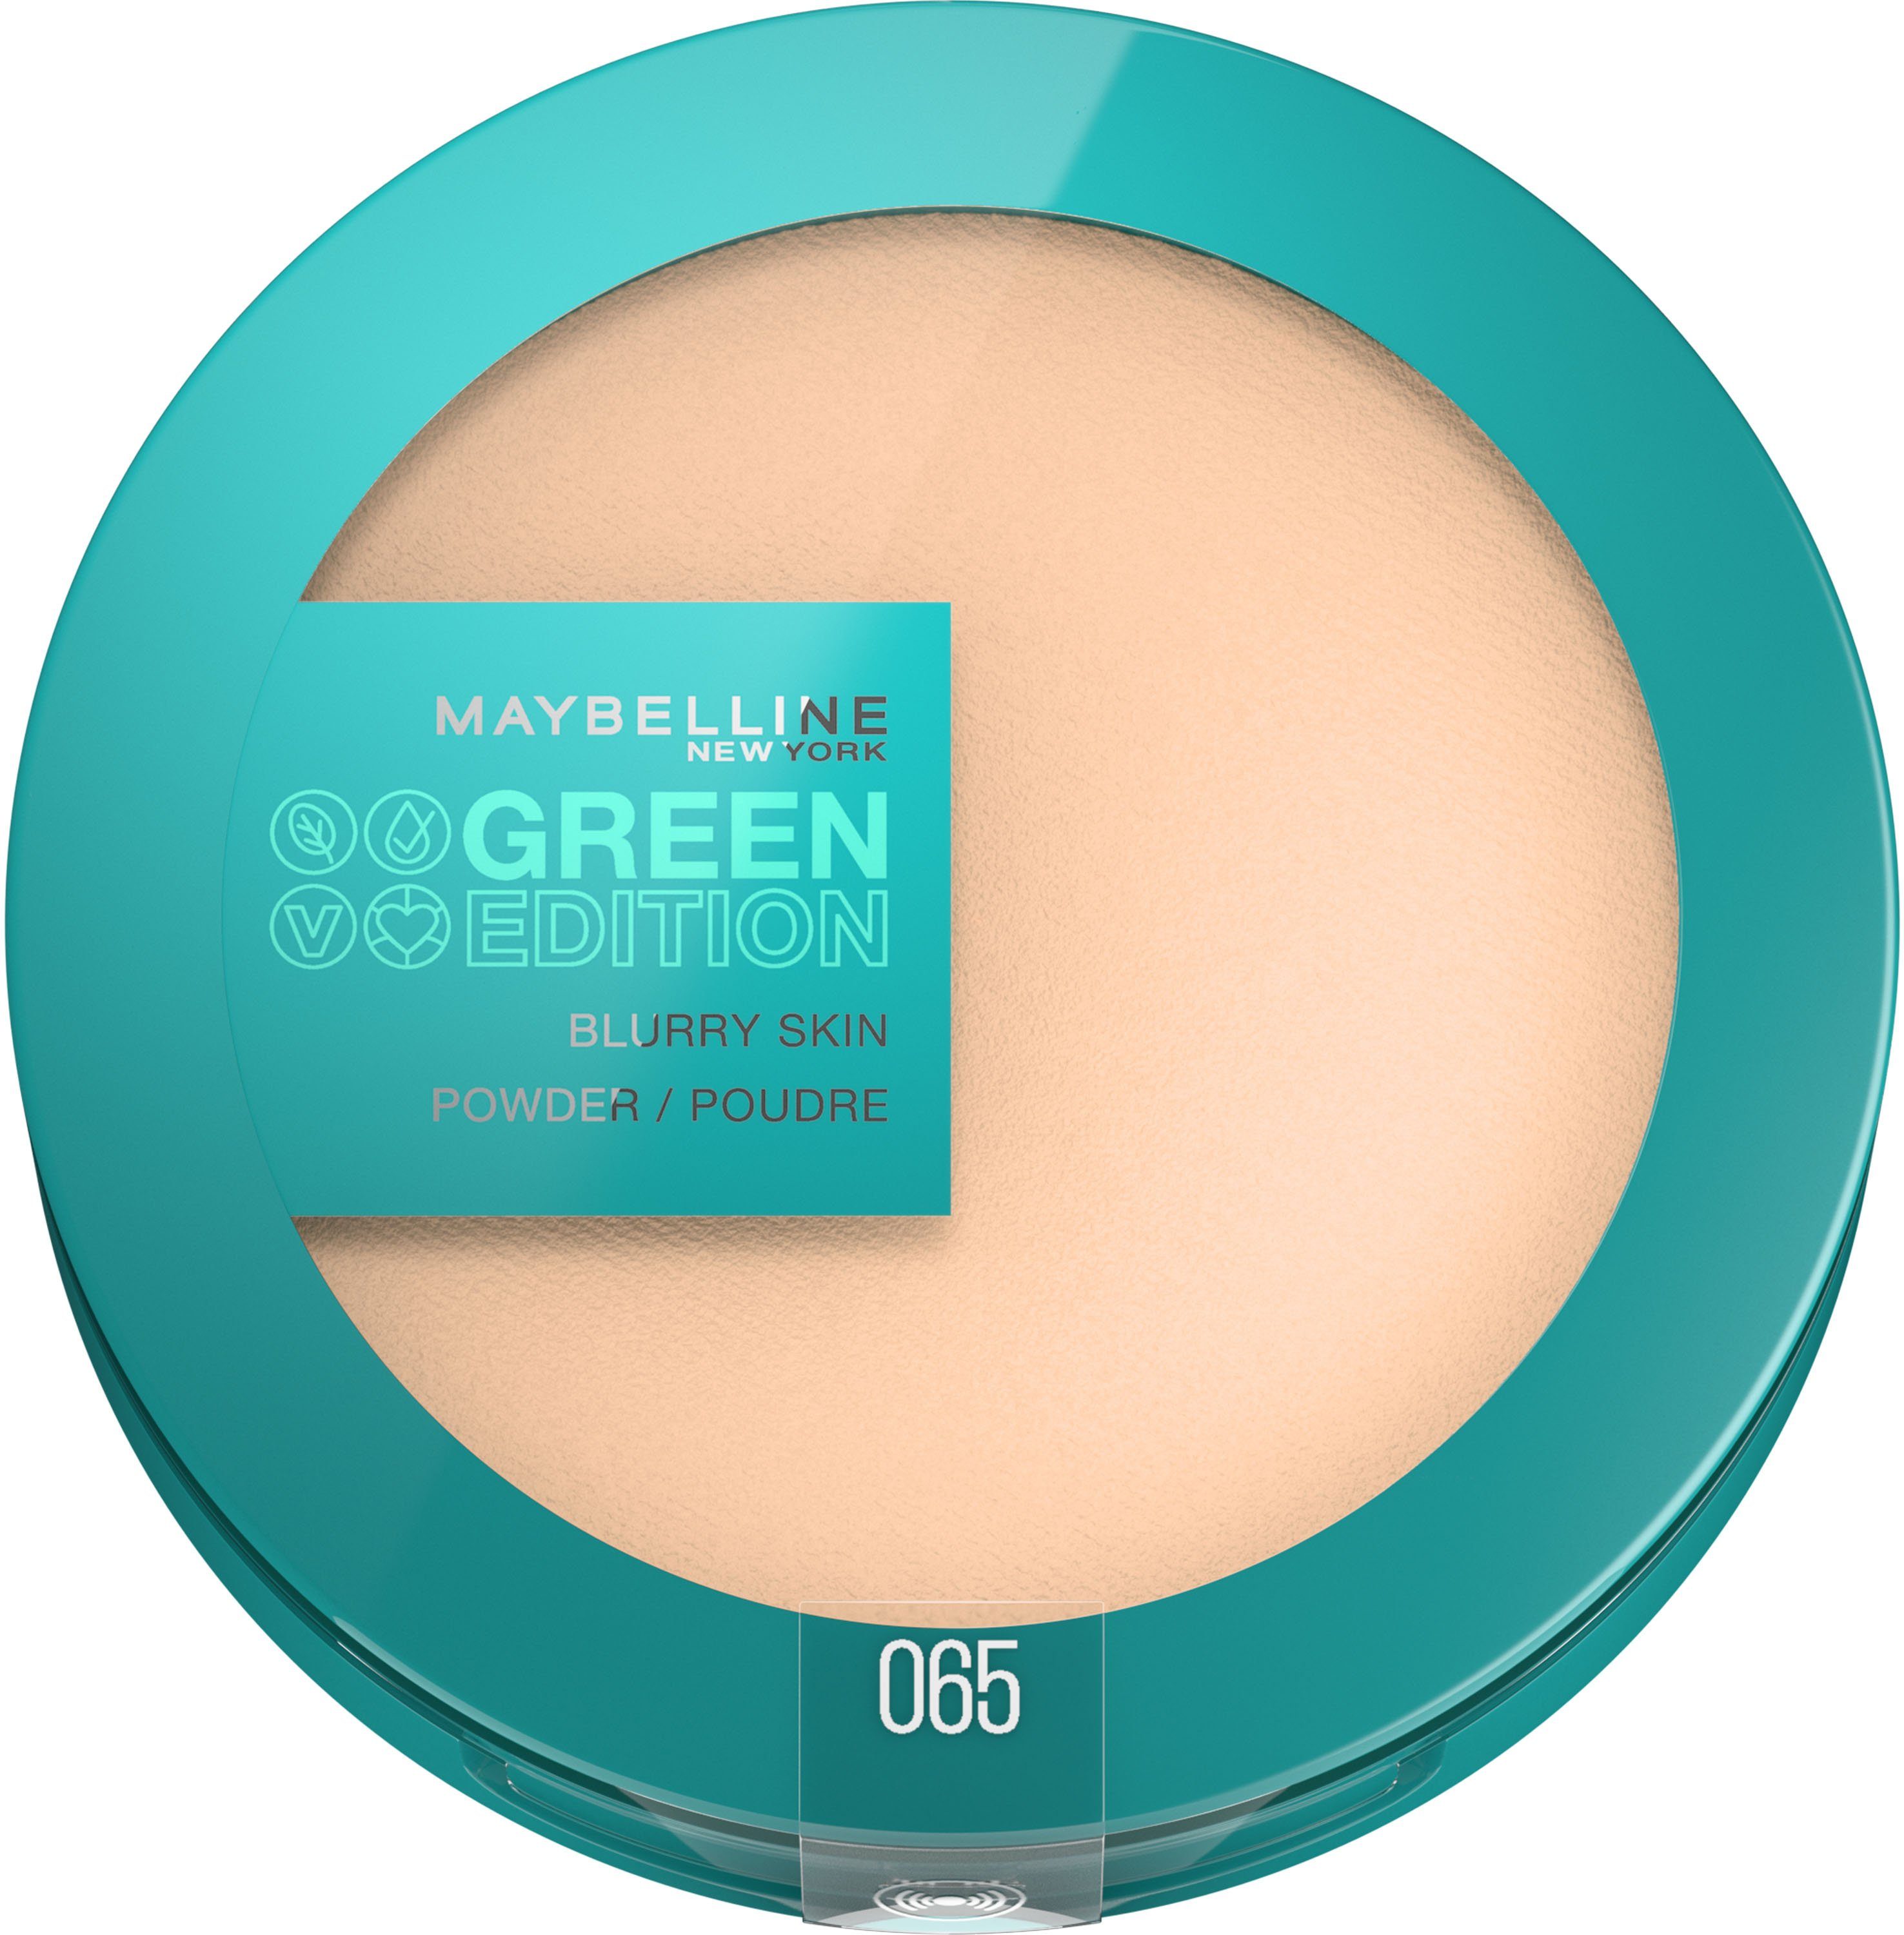 GREEN POWDER Puder Puder NEW Edition 65 MAYBELLINE Green YORK ED